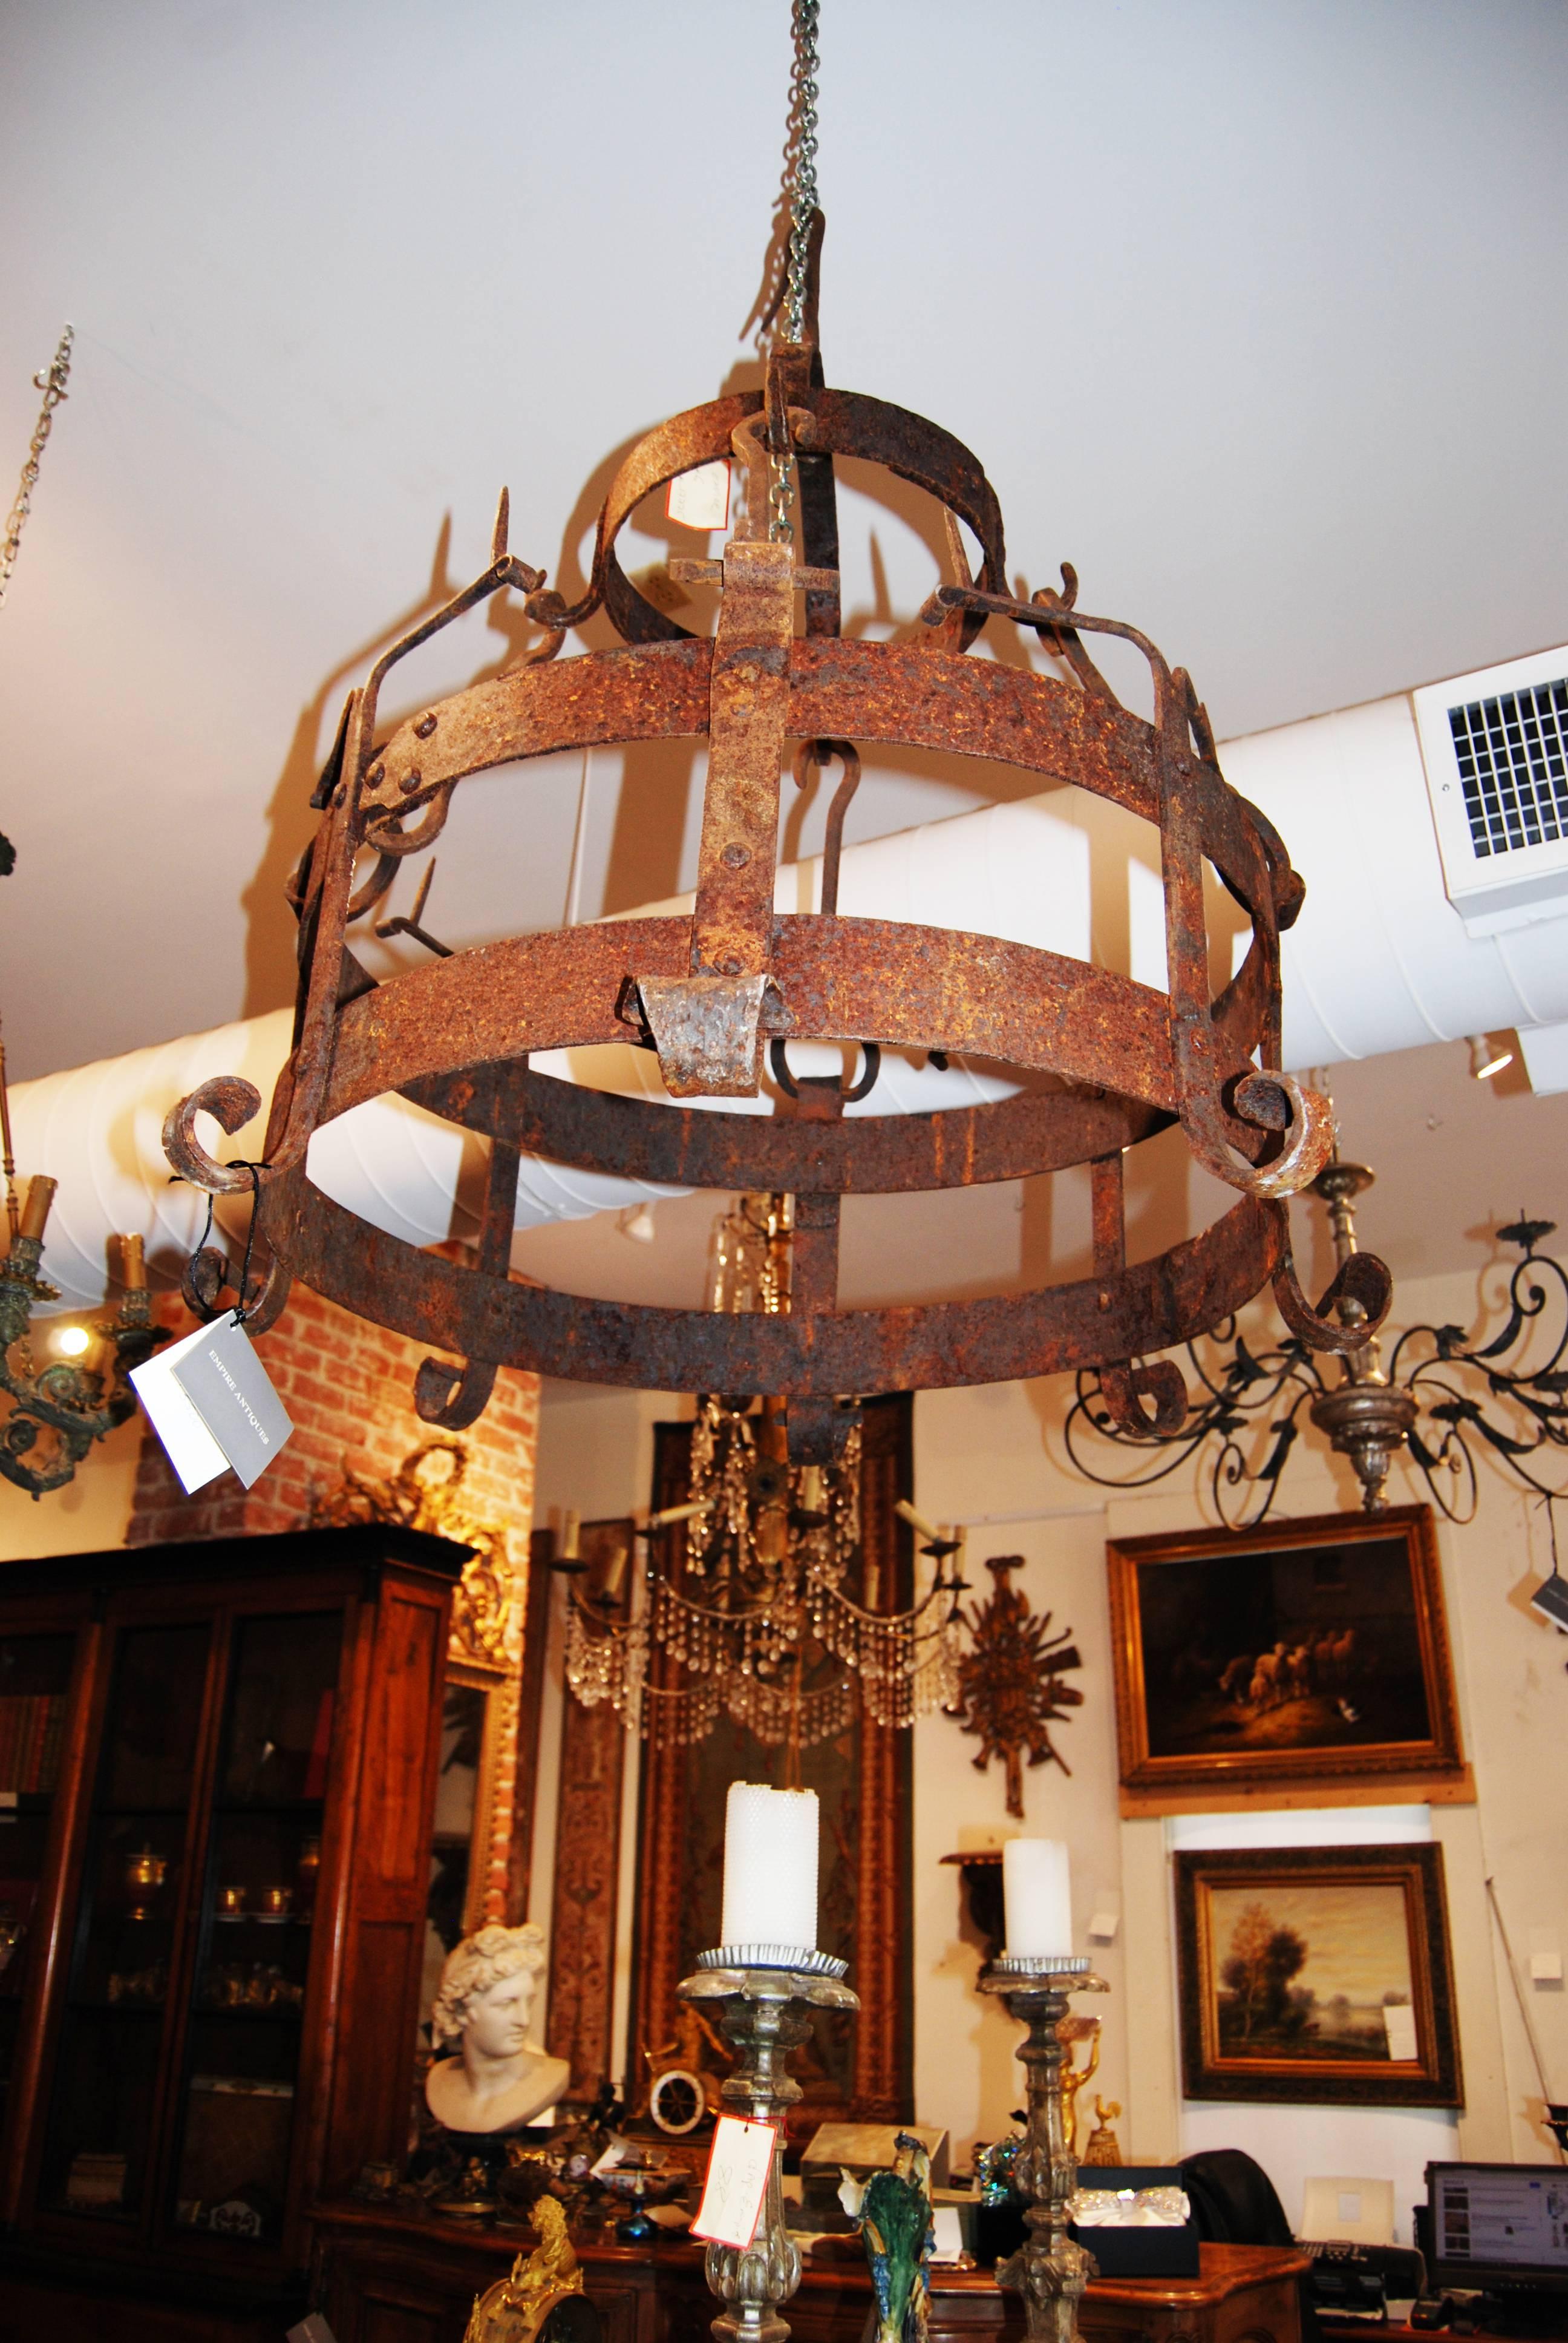 Large 18th century pot holder easily converted to a chandelier.